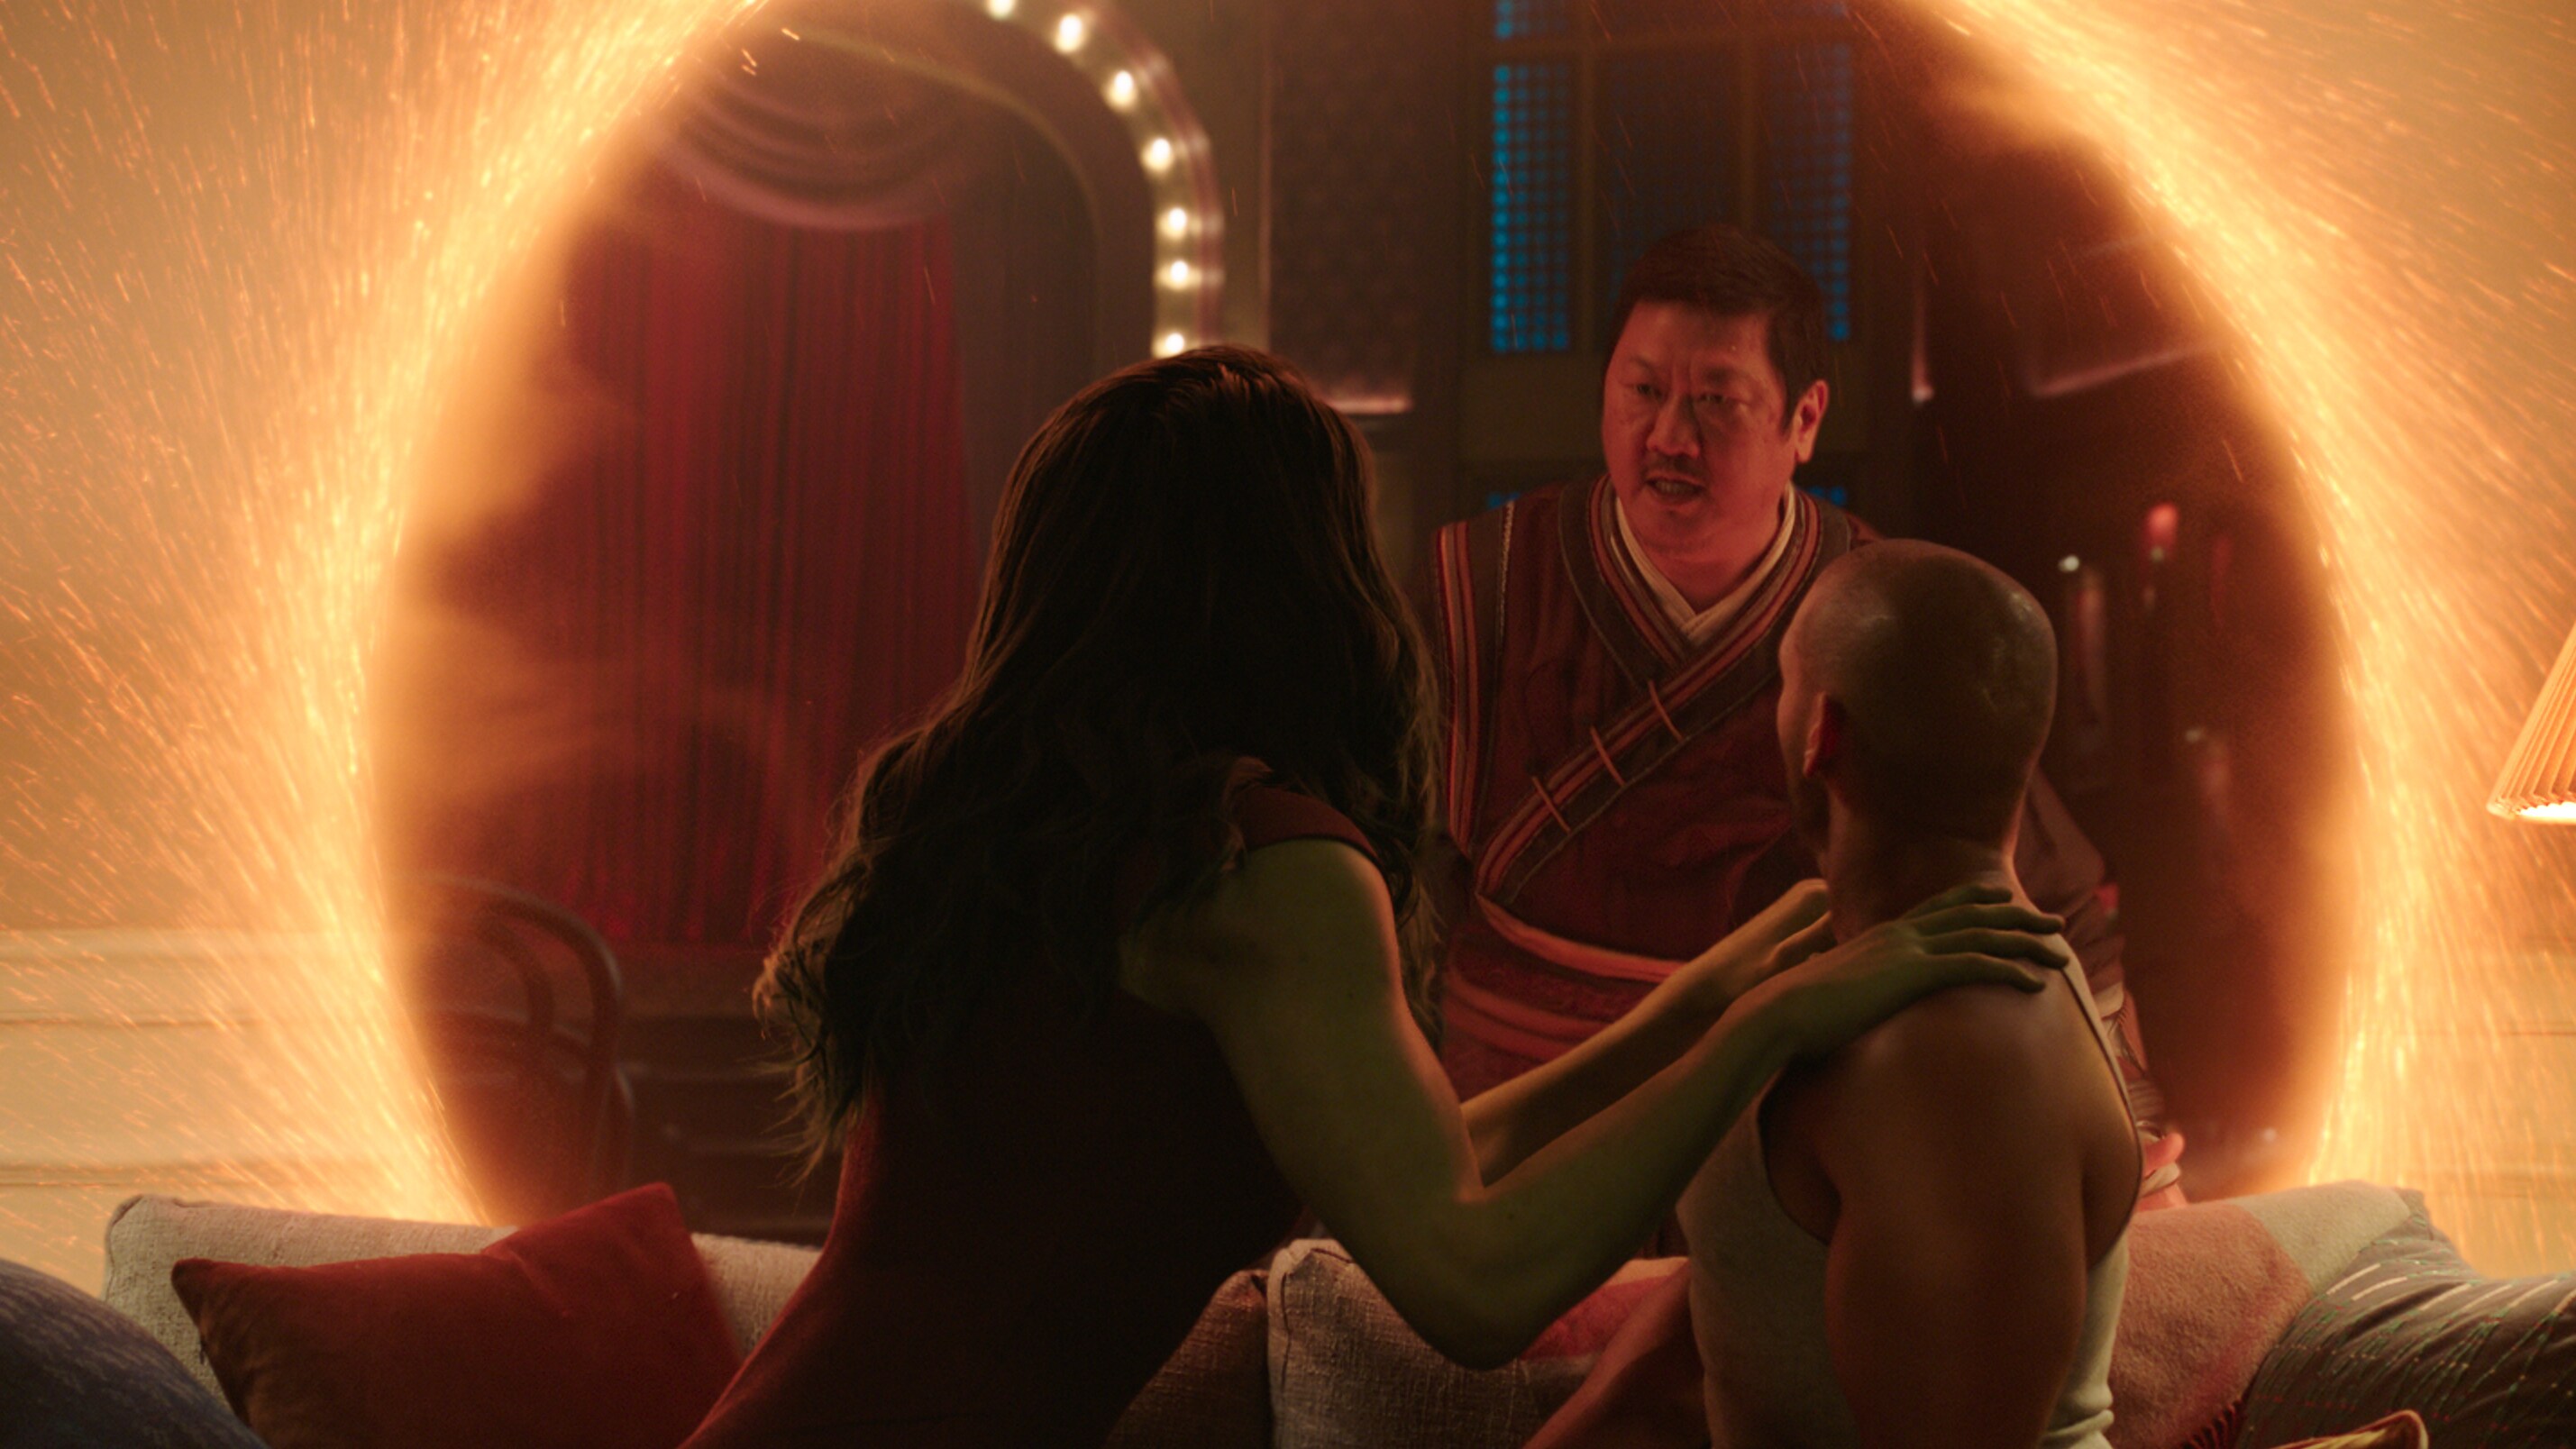 (L-R): Tatiana Maslany as Jennifer "Jen" Walters/She-Hulk Benedict Wong as Wong, and Michael Curiel as Arthur in Marvel Studios' She-Hulk: Attorney at Law, exclusively on Disney+. Photo courtesy of Marvel Studios. © 2022 MARVEL.